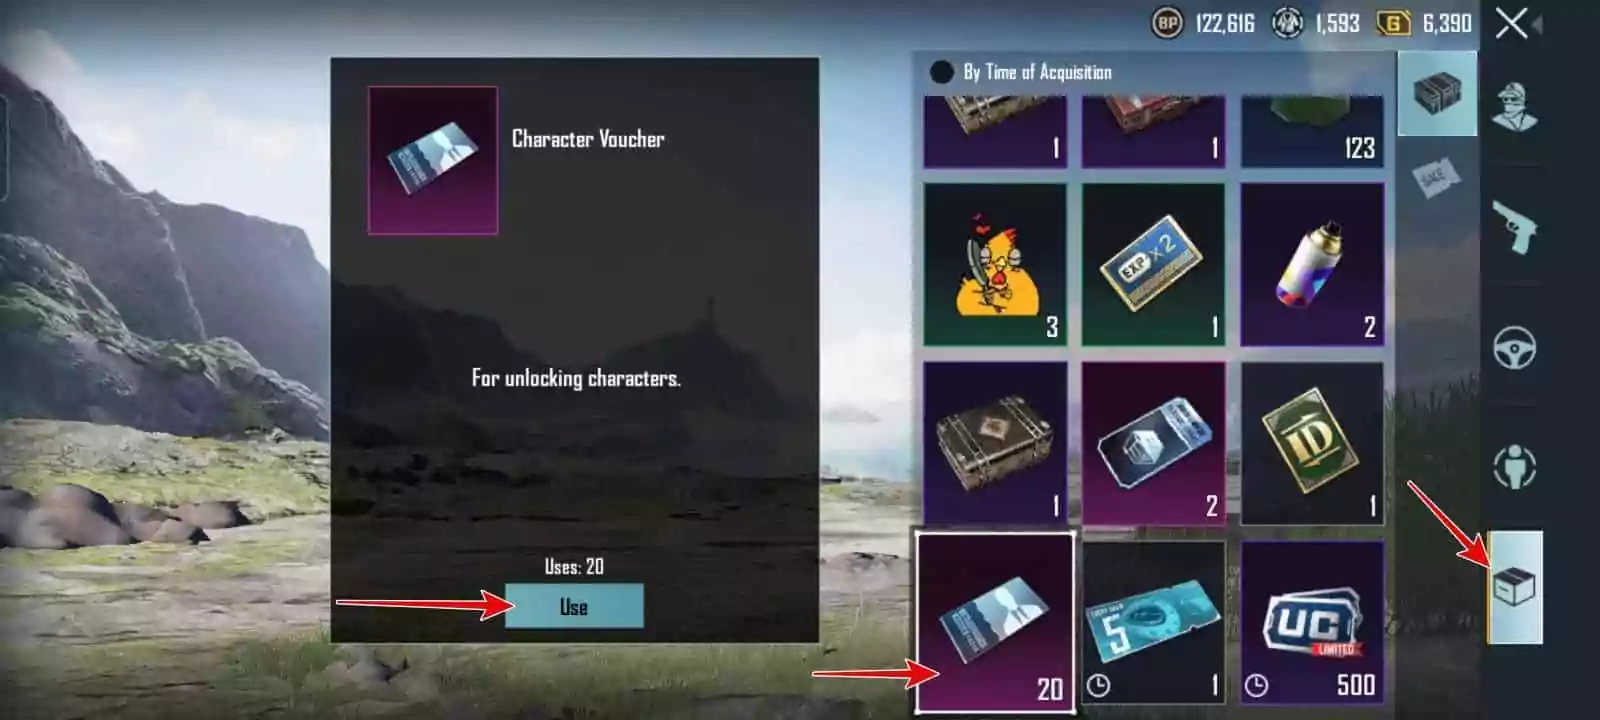 Go to Inventory > Tap on Character Voucher > Use